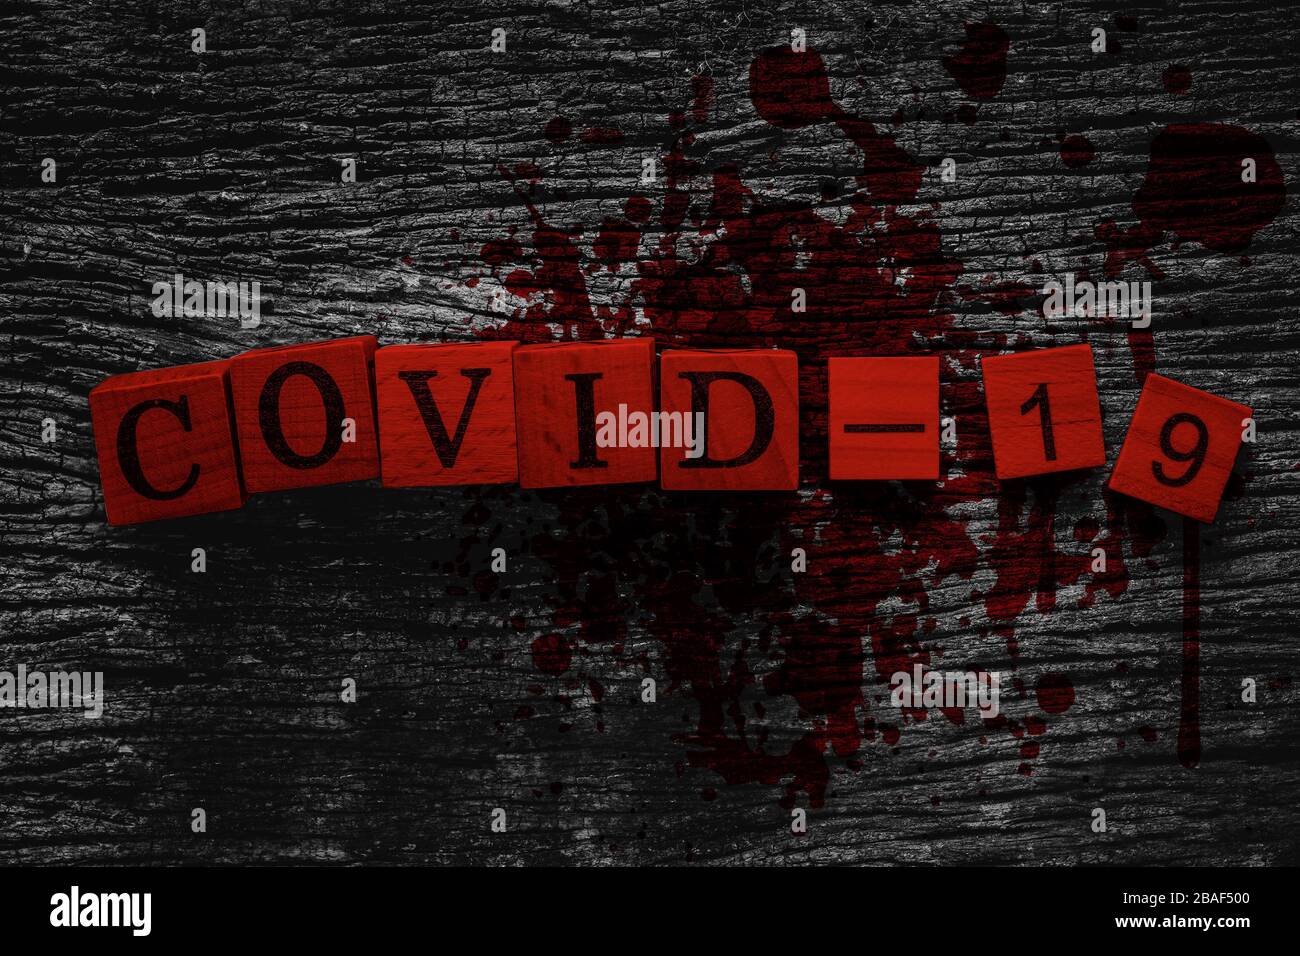 COVID-19 name of Corona virus text on old wood block with blood and gore effect for scary look for web title banner background design . Stock Photo